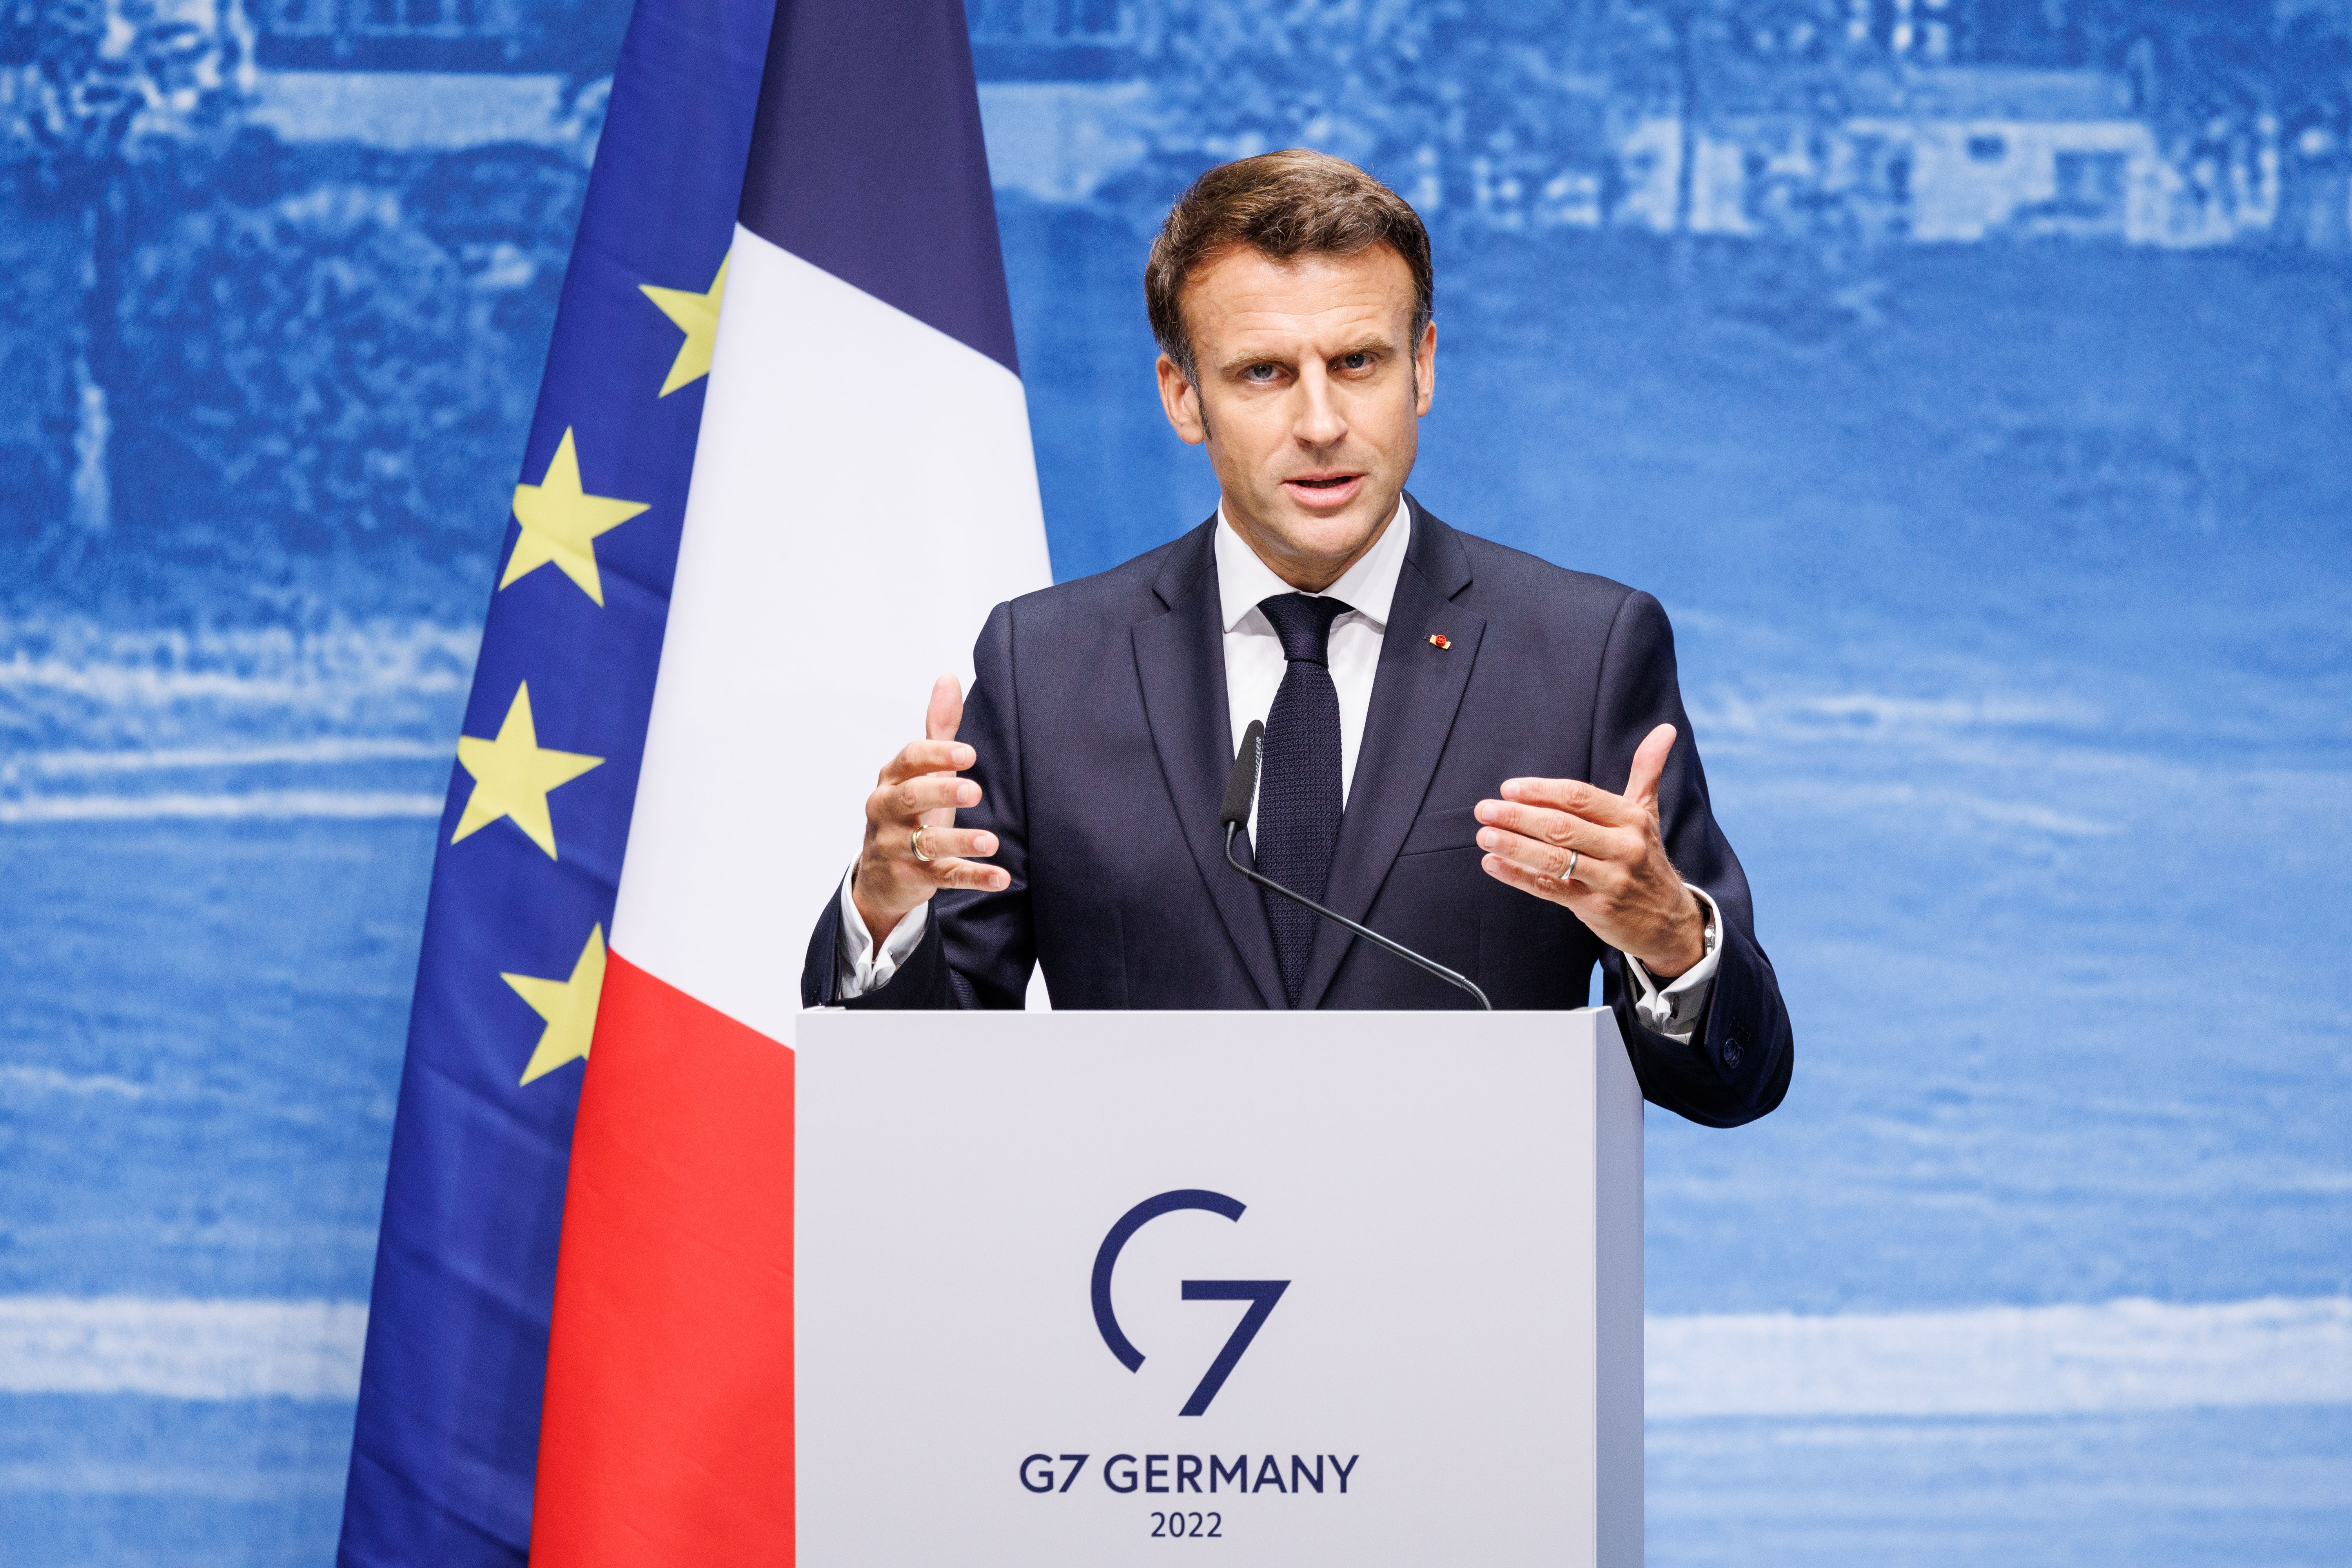 French President Emmanuel Macron gives a press conference at the end of the G7 summit.